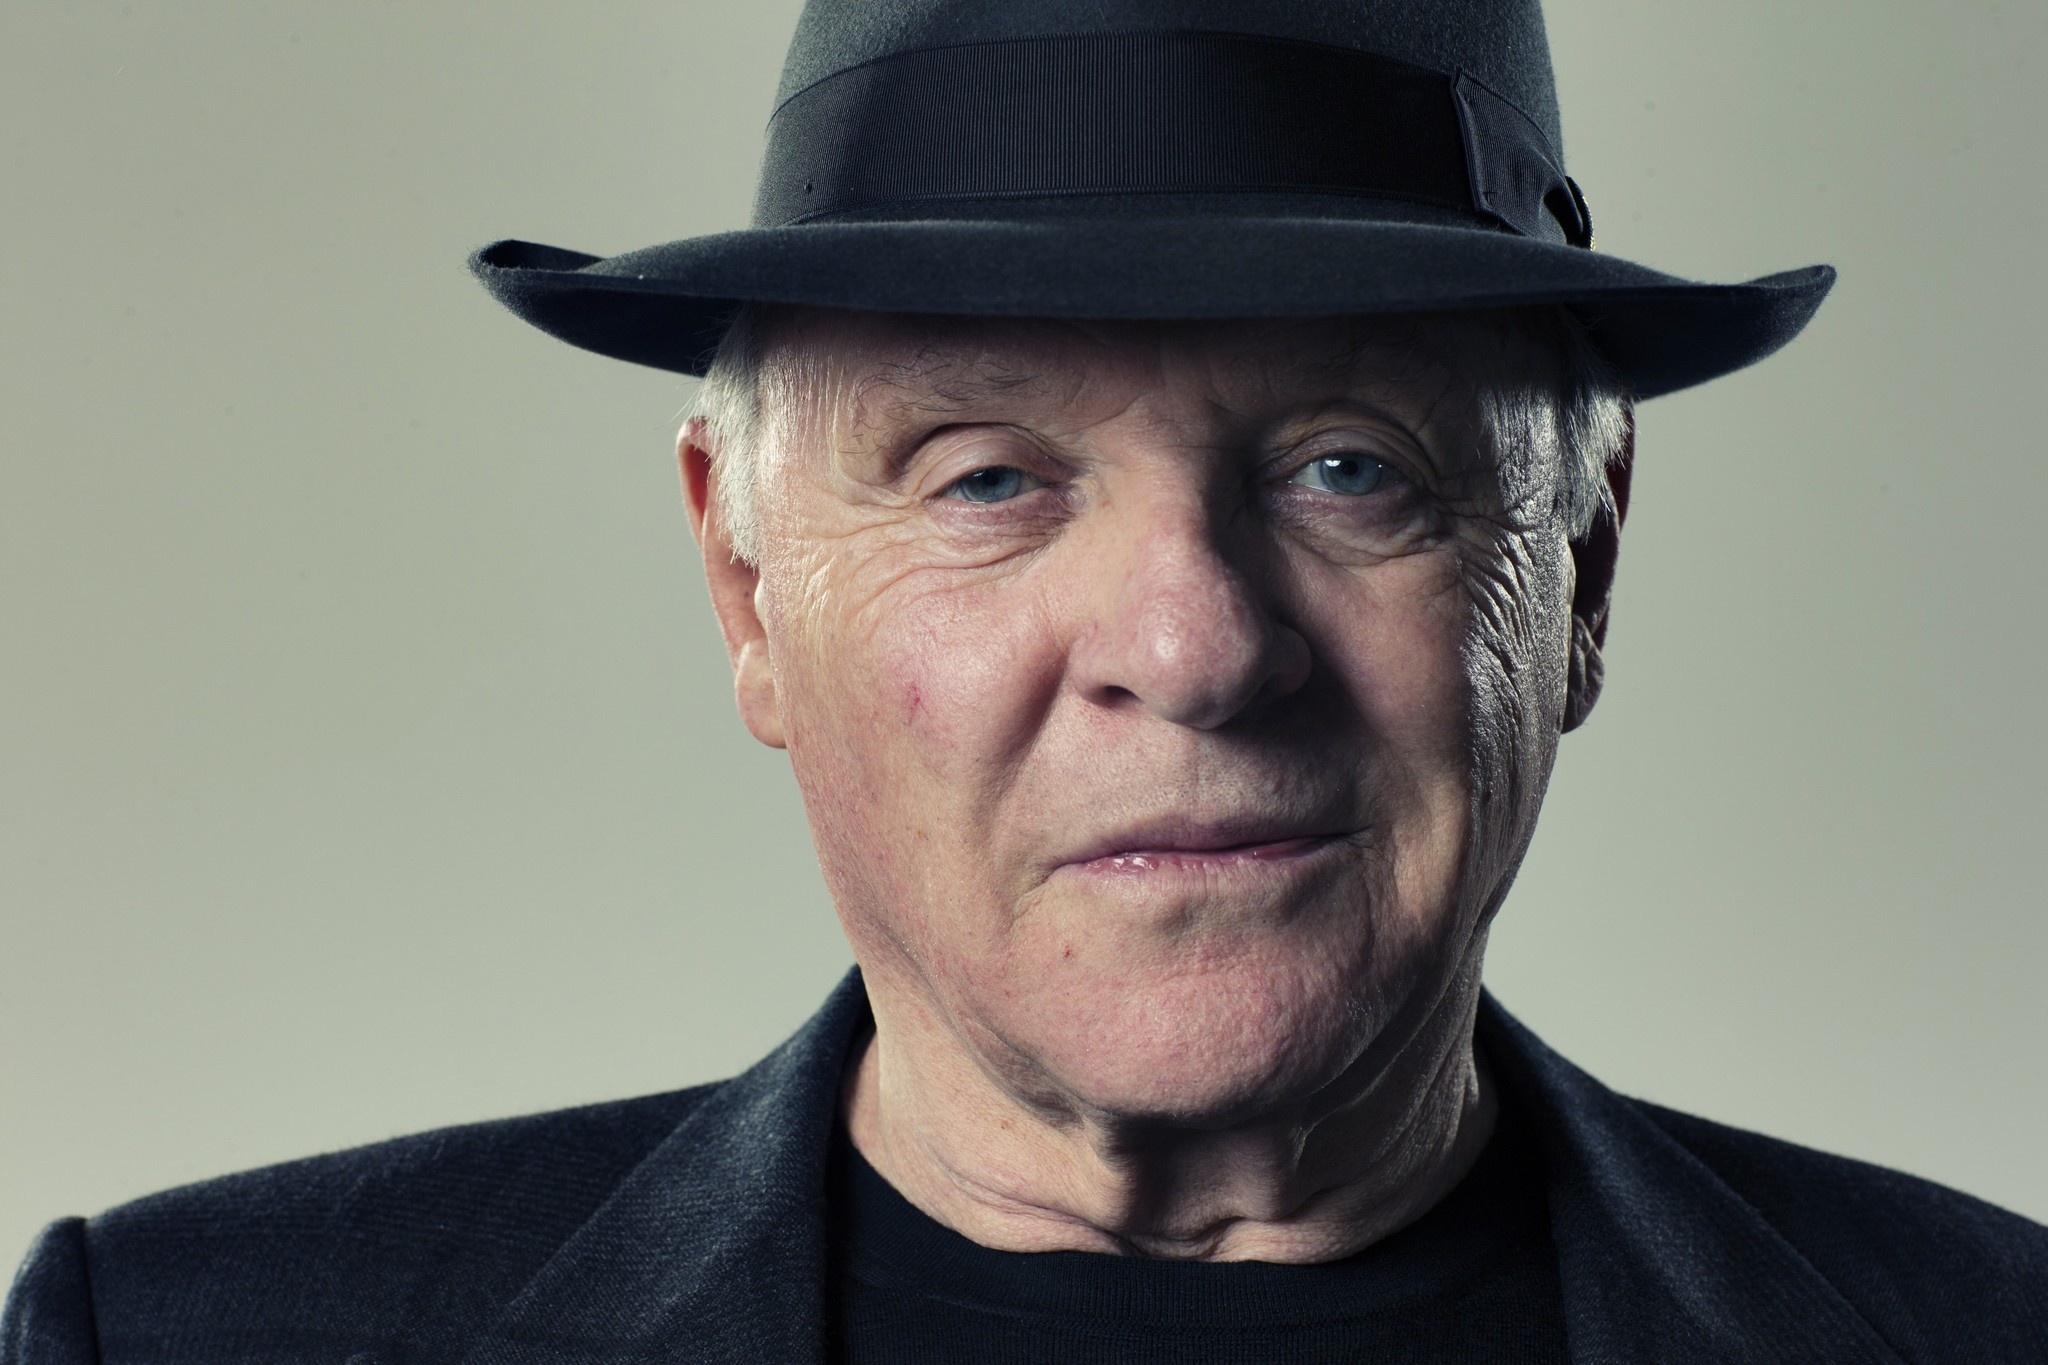 Anthony Hopkins wearing a black shirt and hat while smiling